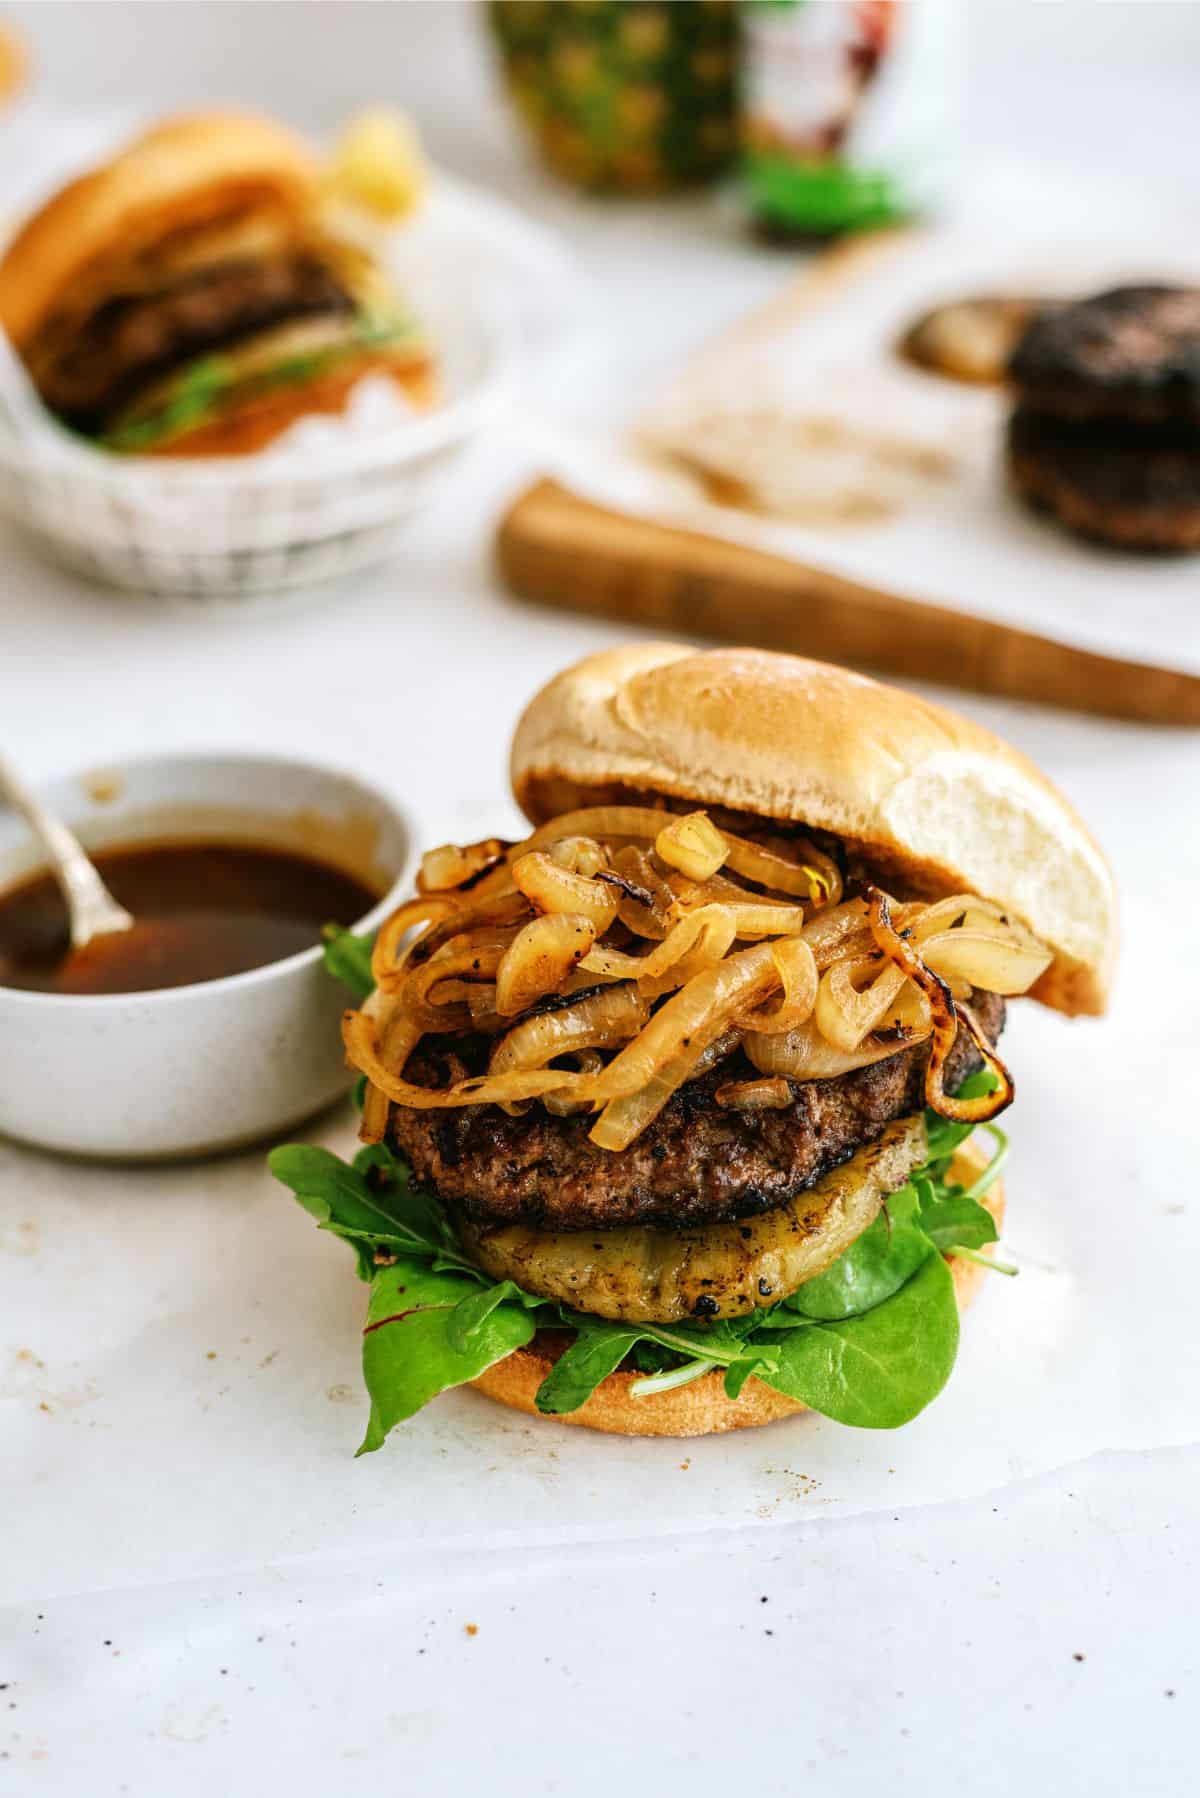 Grilled Teriyaki Burgers topped with caramelized onions